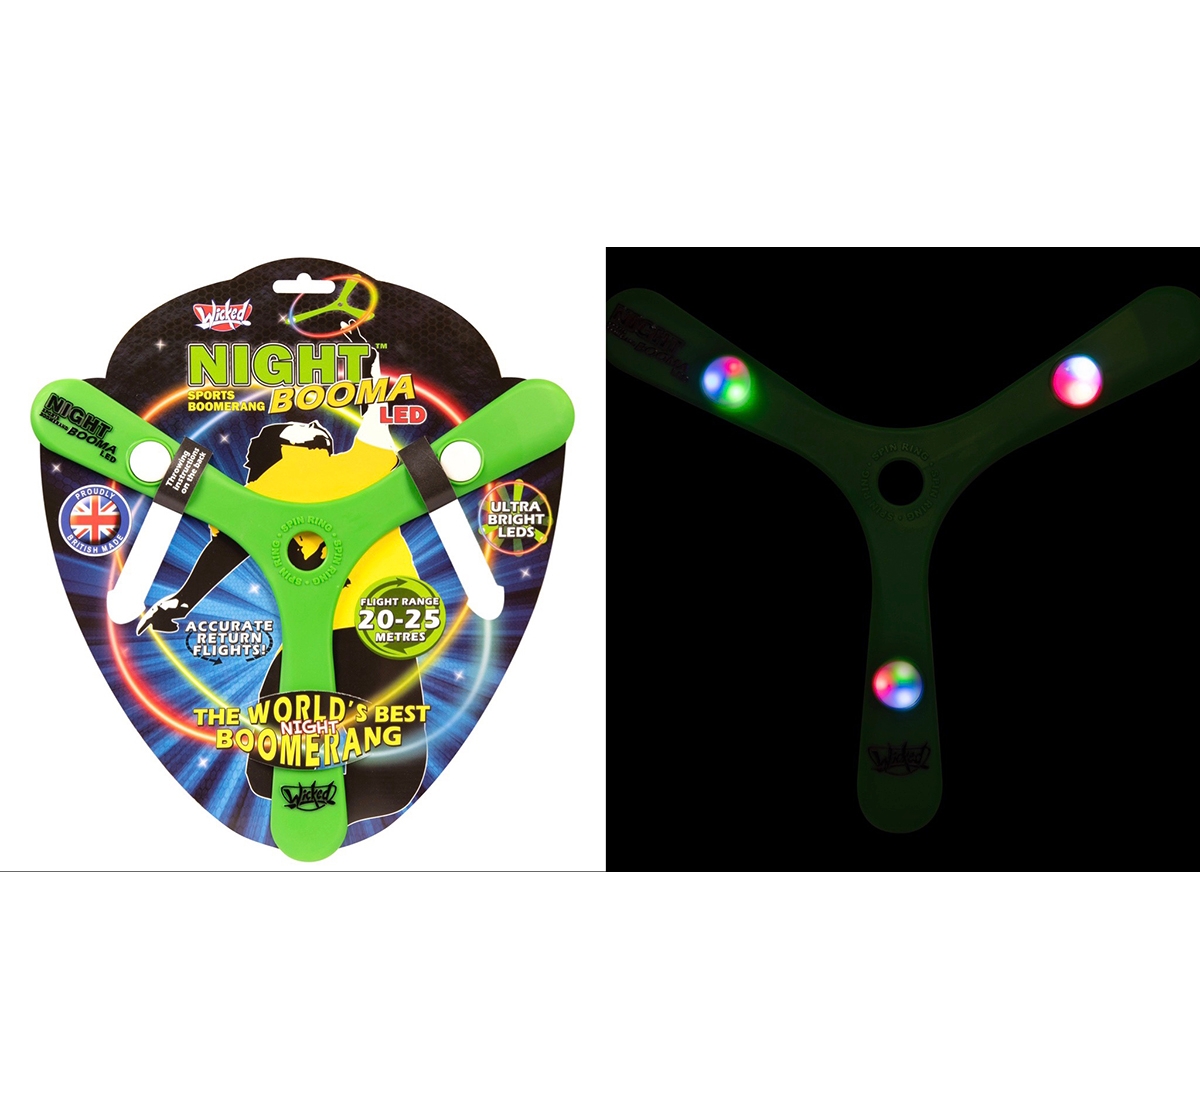 Wicked | Wicked Night Sports Boomerang Led- Impulse Toys for Kids age 5Y+ (Green)